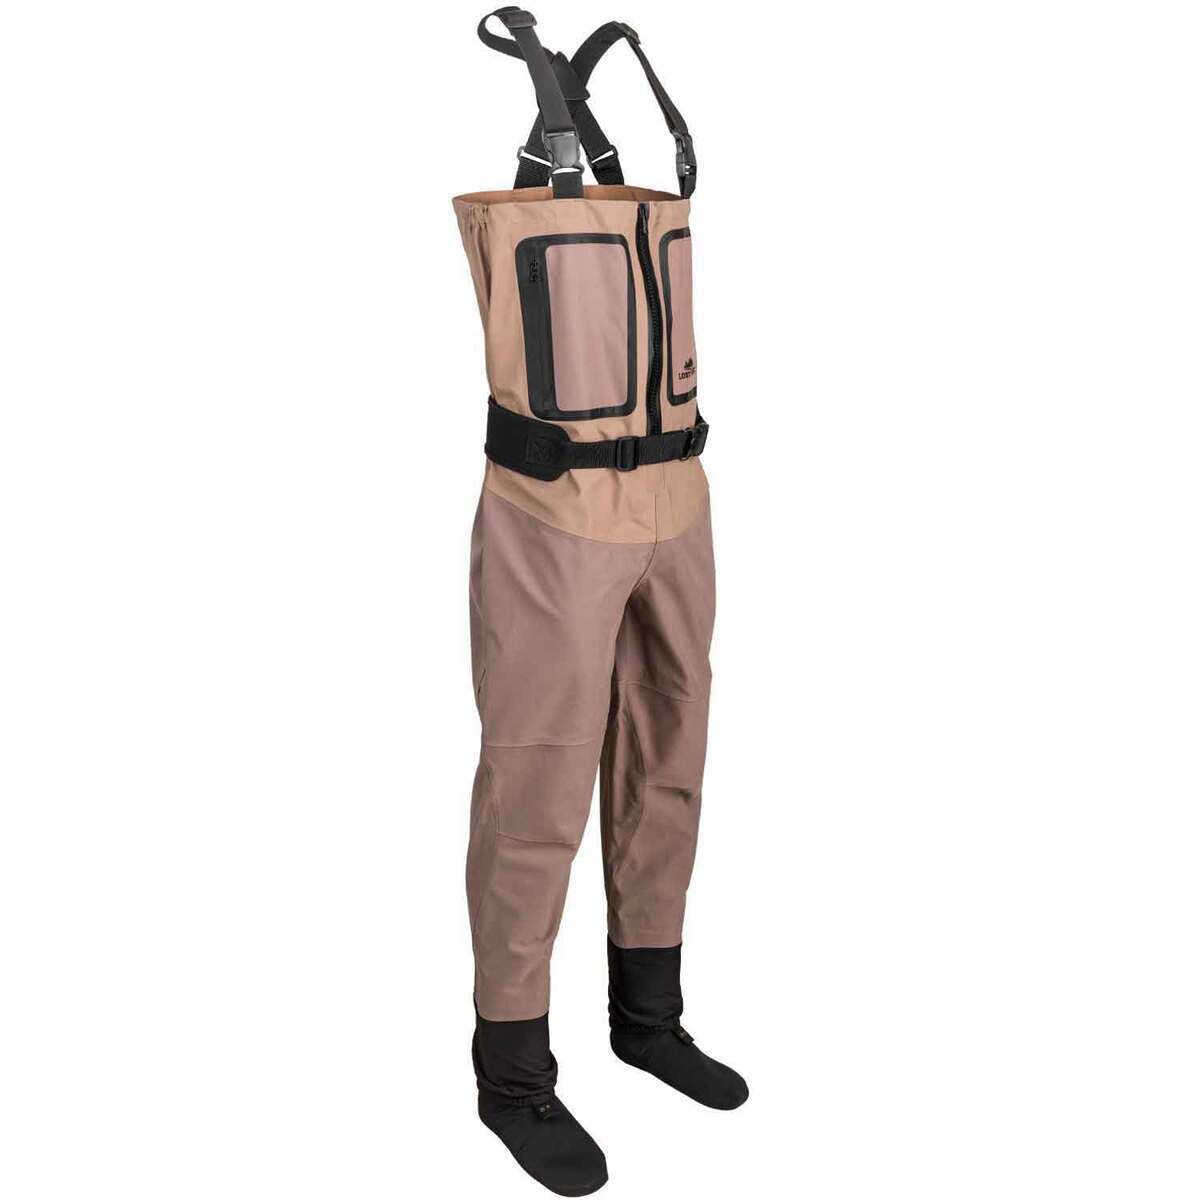  FROGG TOGGS Men's Refuge Wader Pant, Brown, Small : Automotive